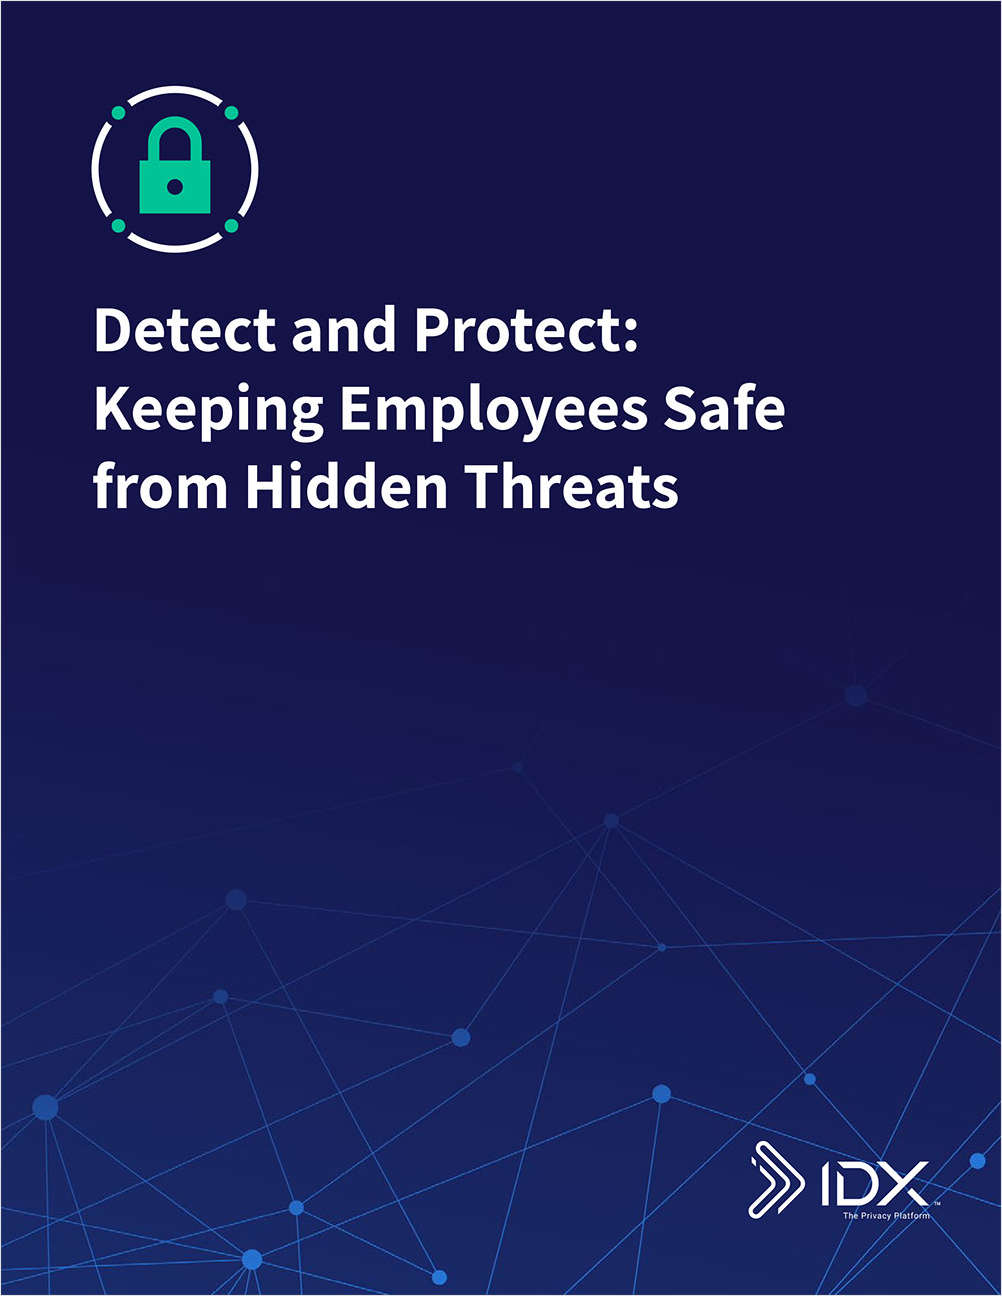 Detect and Protect: Keeping Employees Safe from Hidden Threats